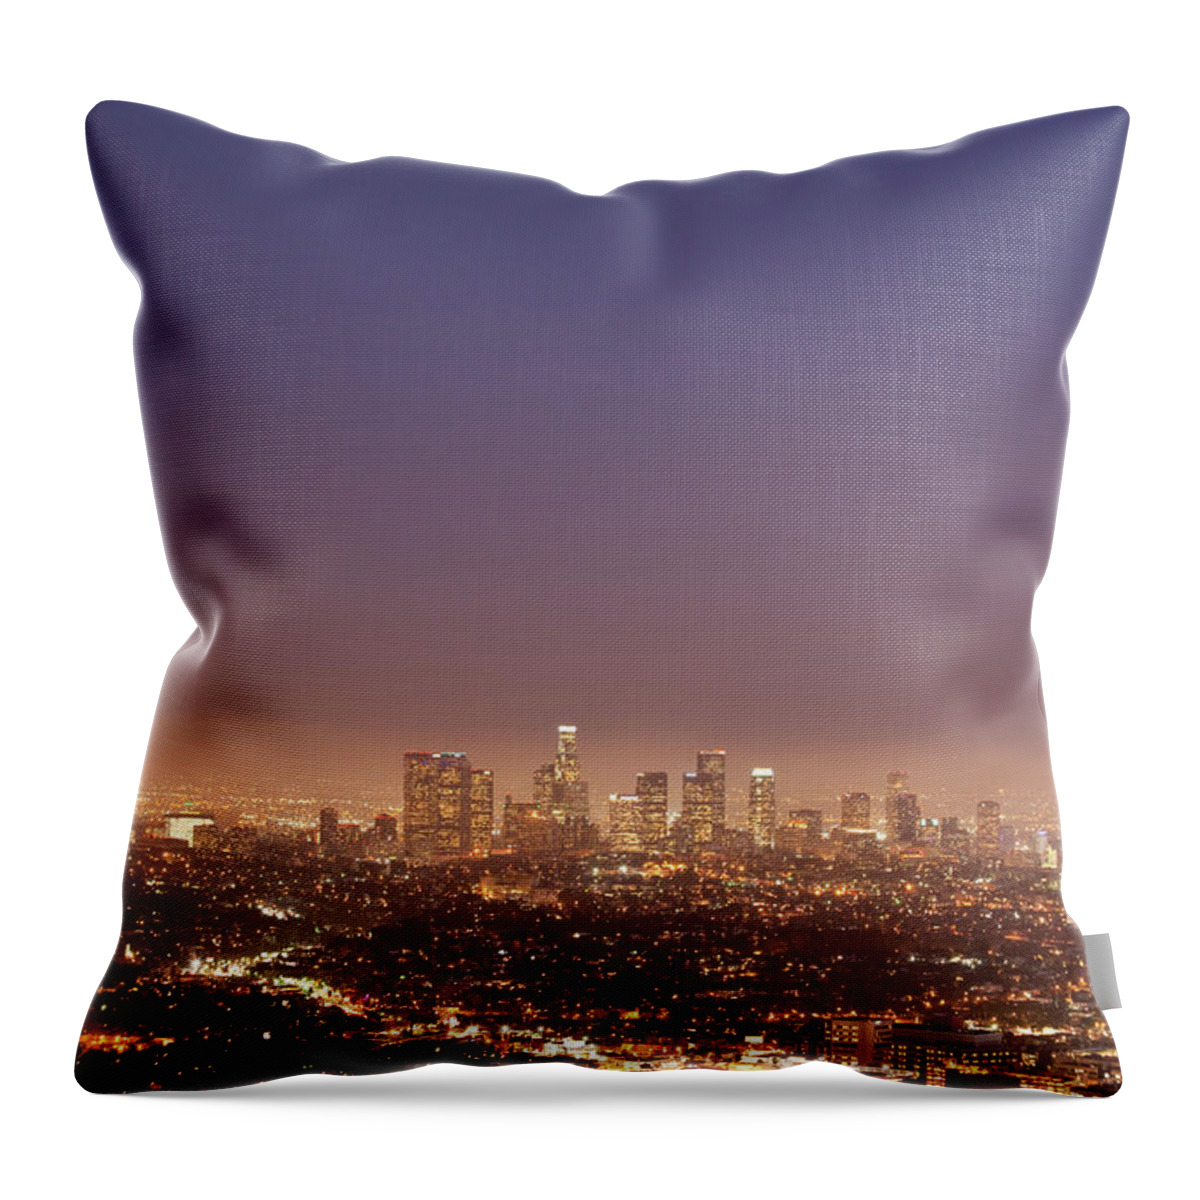 Scenics Throw Pillow featuring the photograph Los Angeles Skyline At Twilight by Uschools